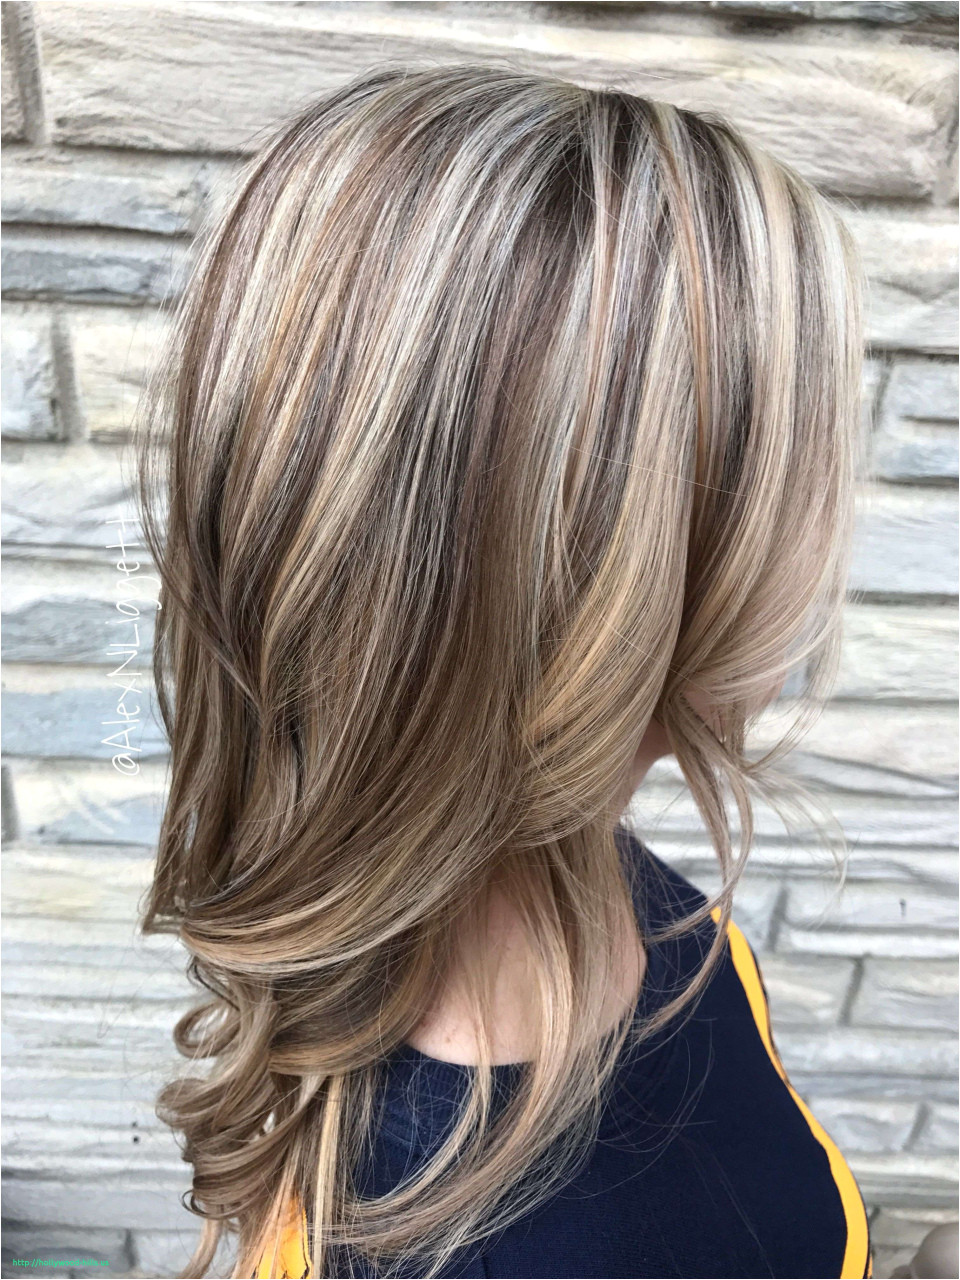 2019 Highlights Hairstyles Best Hairstyles with Dramatic Highlights Unique I Pinimg 1200x 0d 60